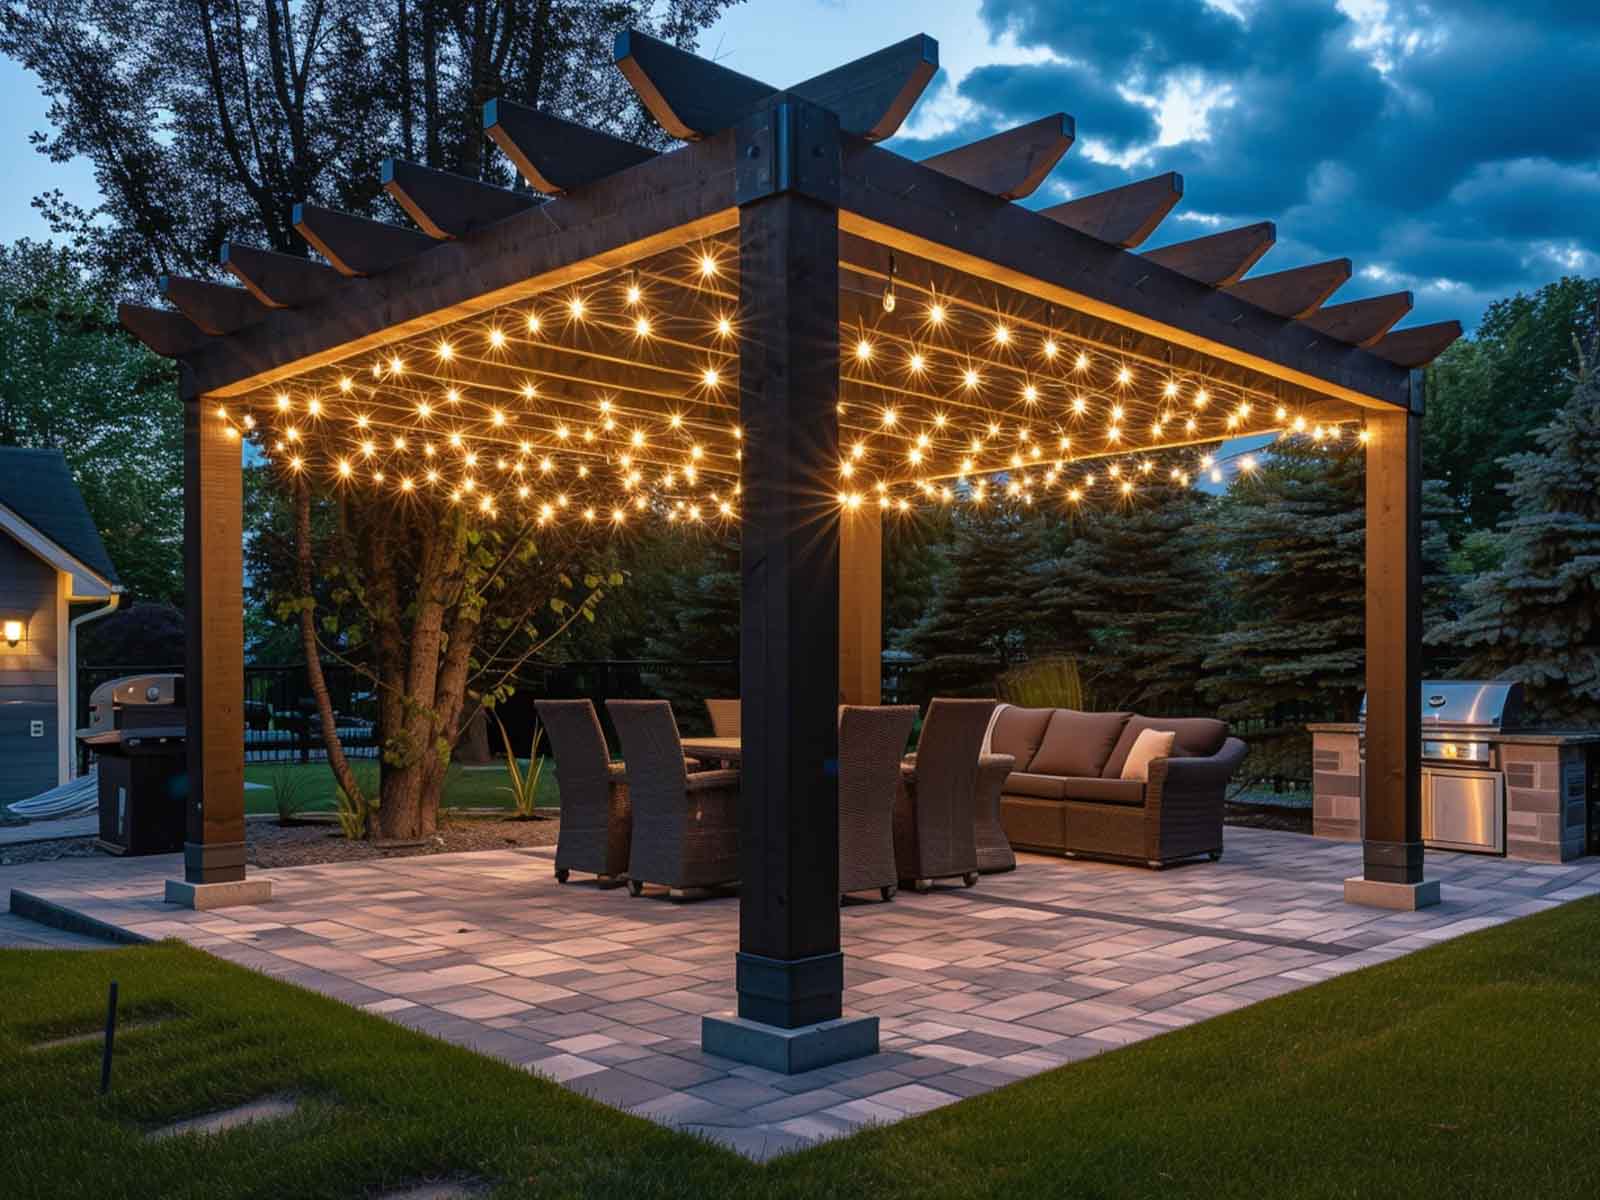 A canopy of string lights on a pergola roof over an outdoor dining area